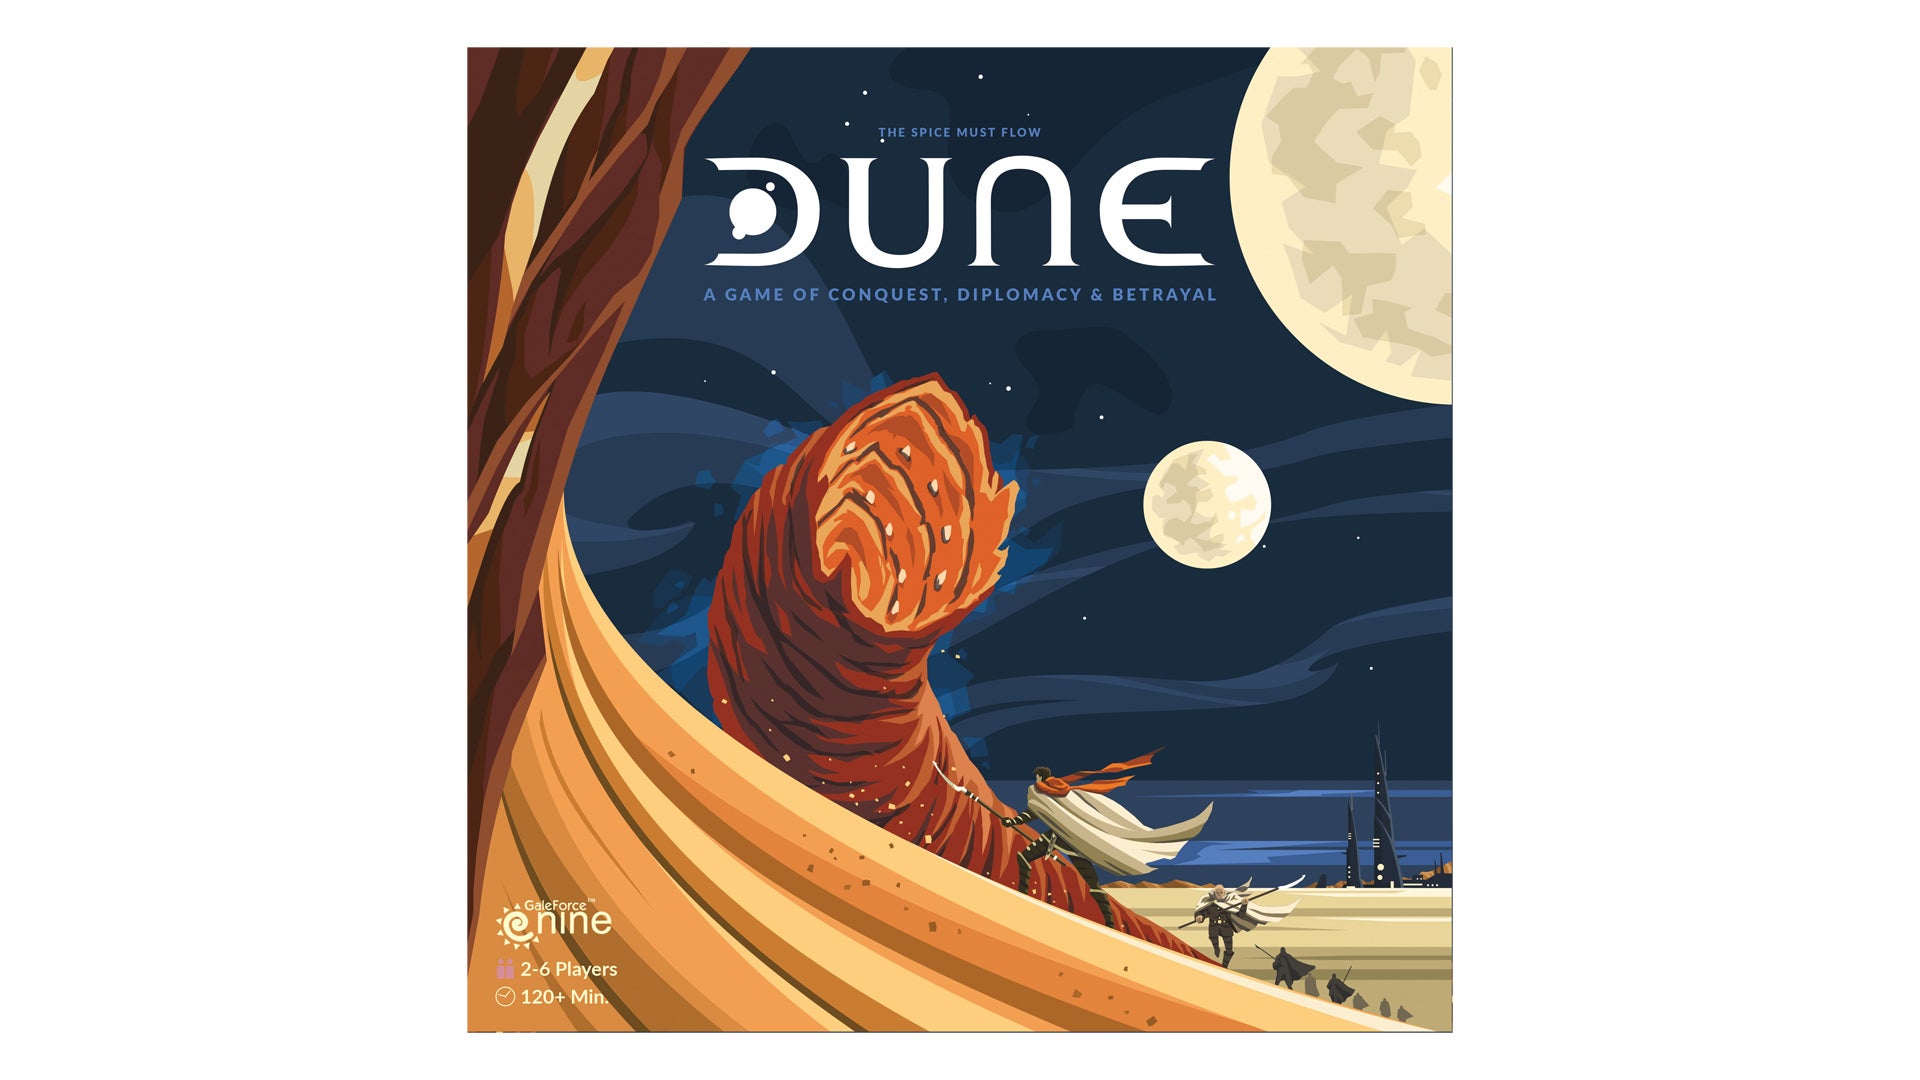 Image for Dune (2019)